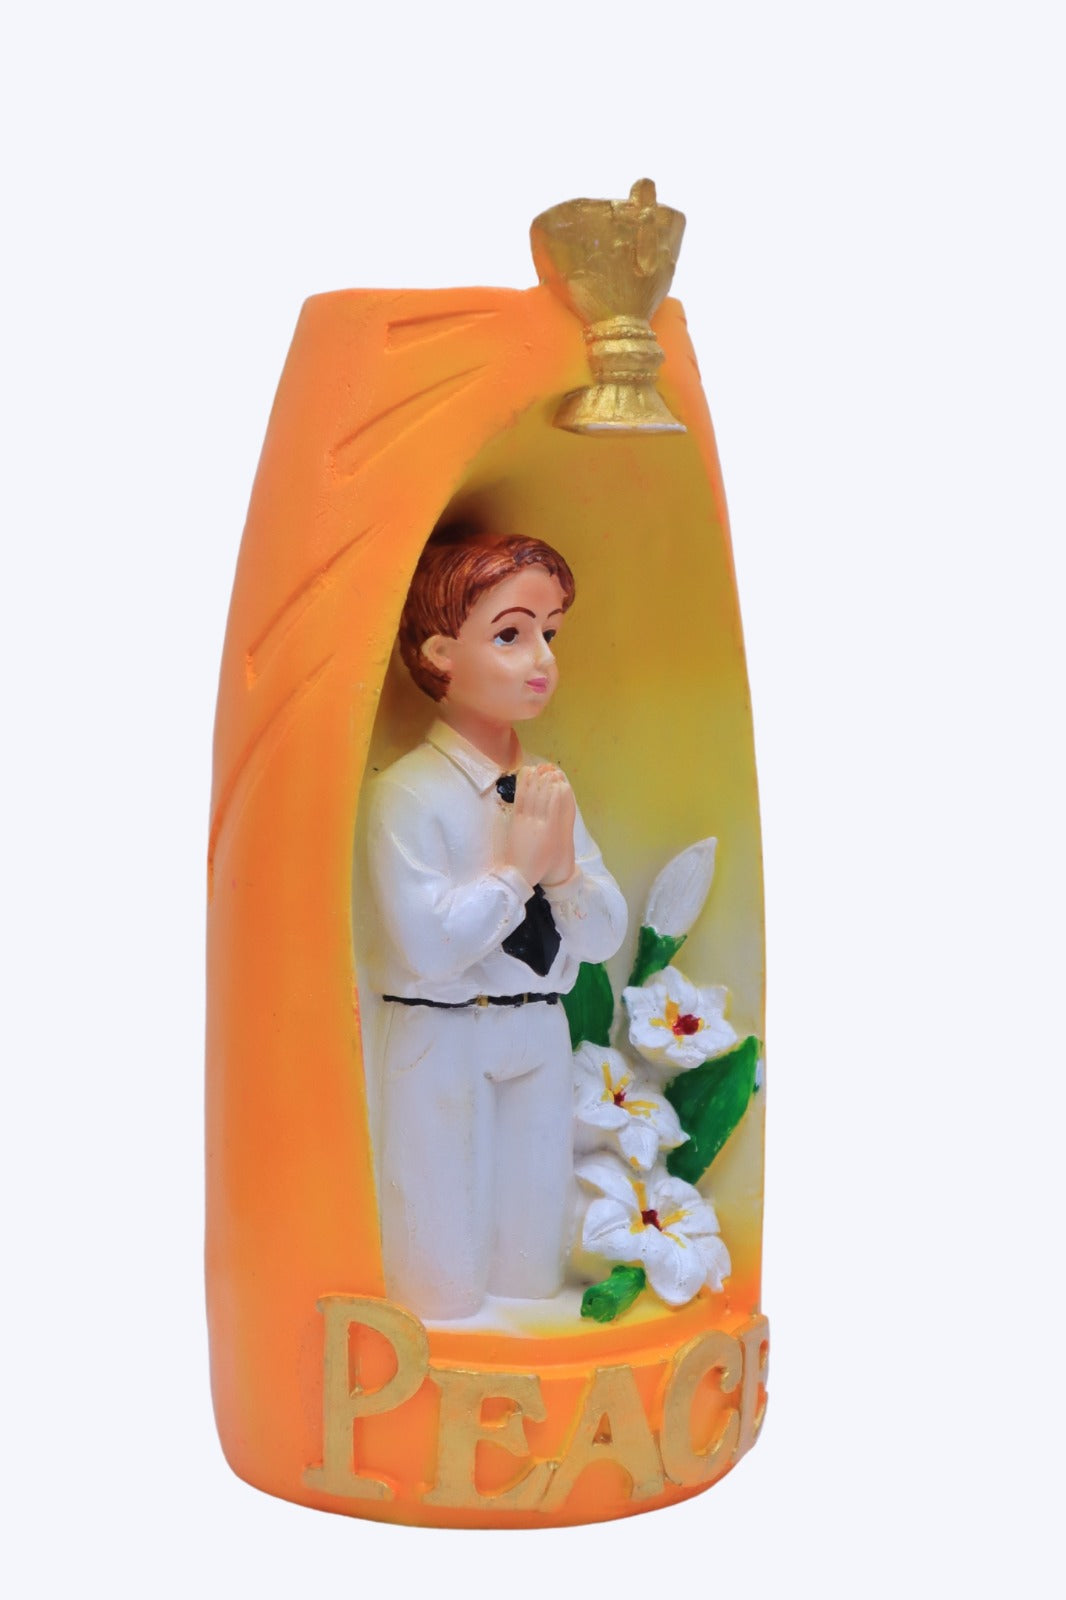 Buy Holy Communion Sacred Soul 9 Inch - Boy Statues Online - Living Words